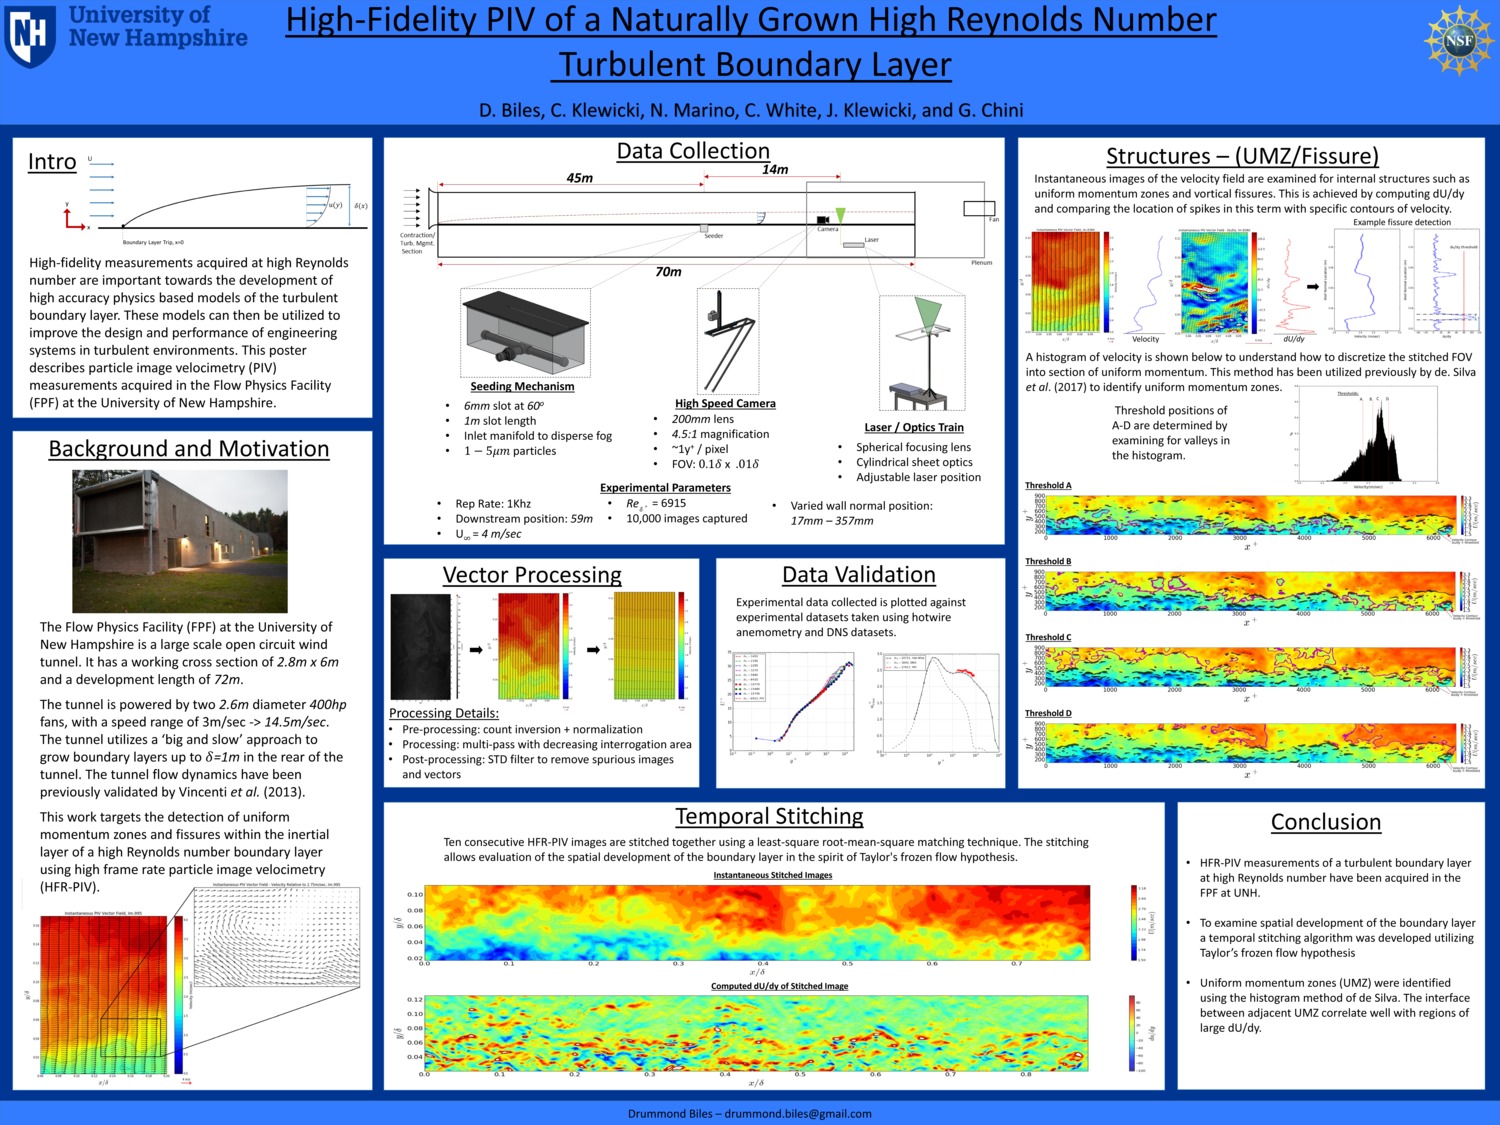 High-Fidelity Piv Of A Naturally Grown High Reynolds Number Turbulent Boundary Layer by biles430